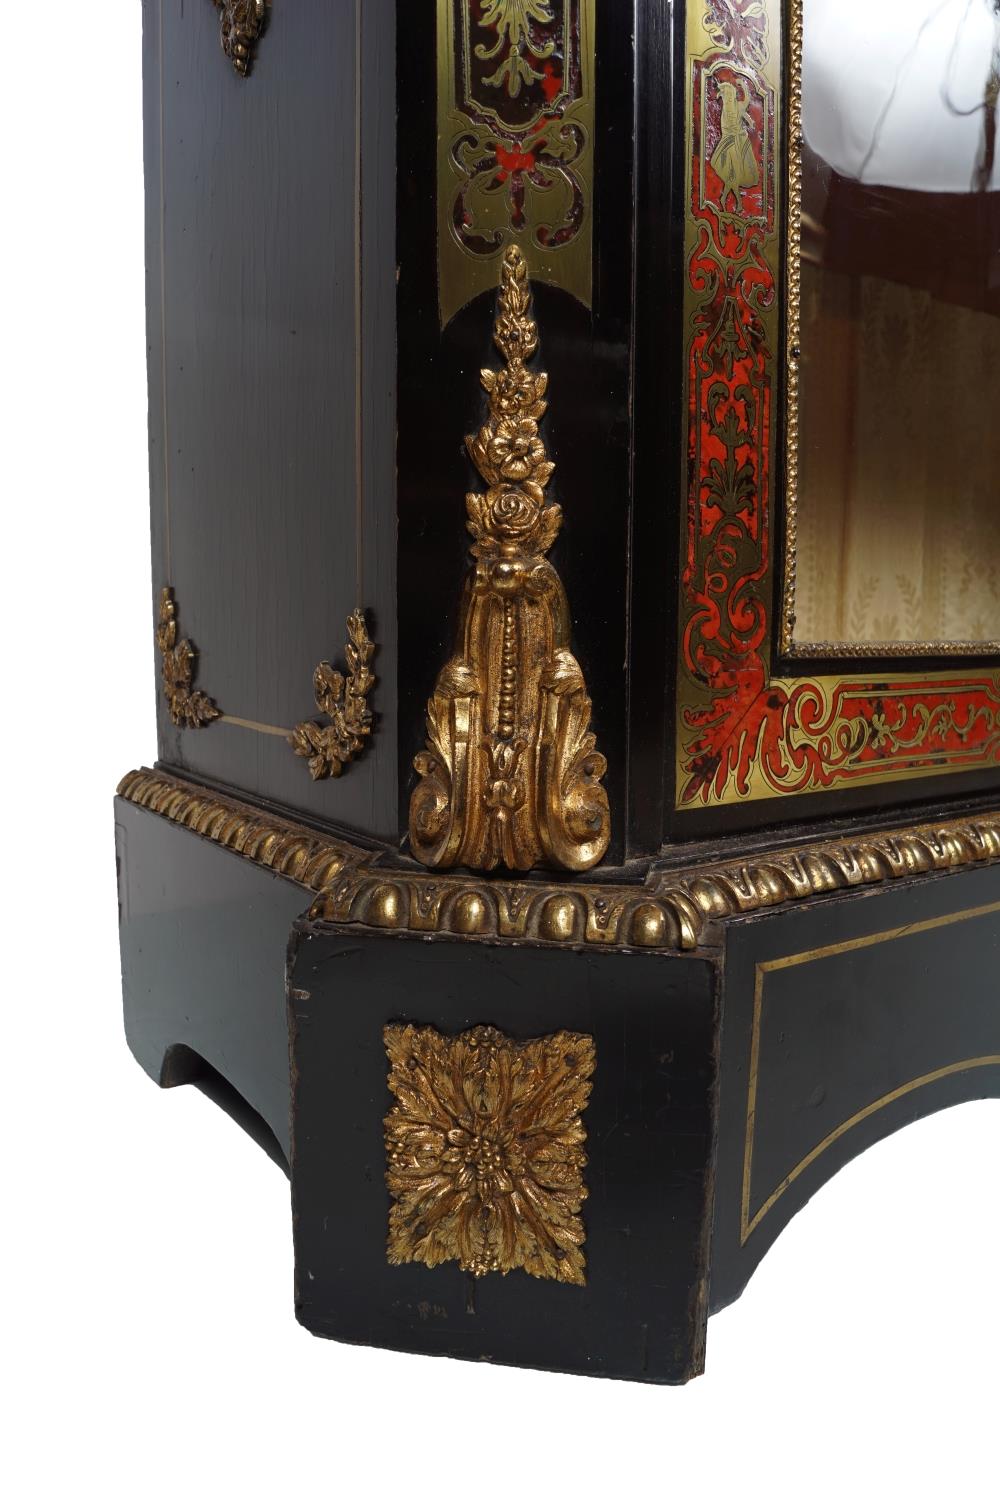 19TH-CENTURY ORMOLU-MOUNTED BOULLE SIDE CABINET - Image 5 of 5